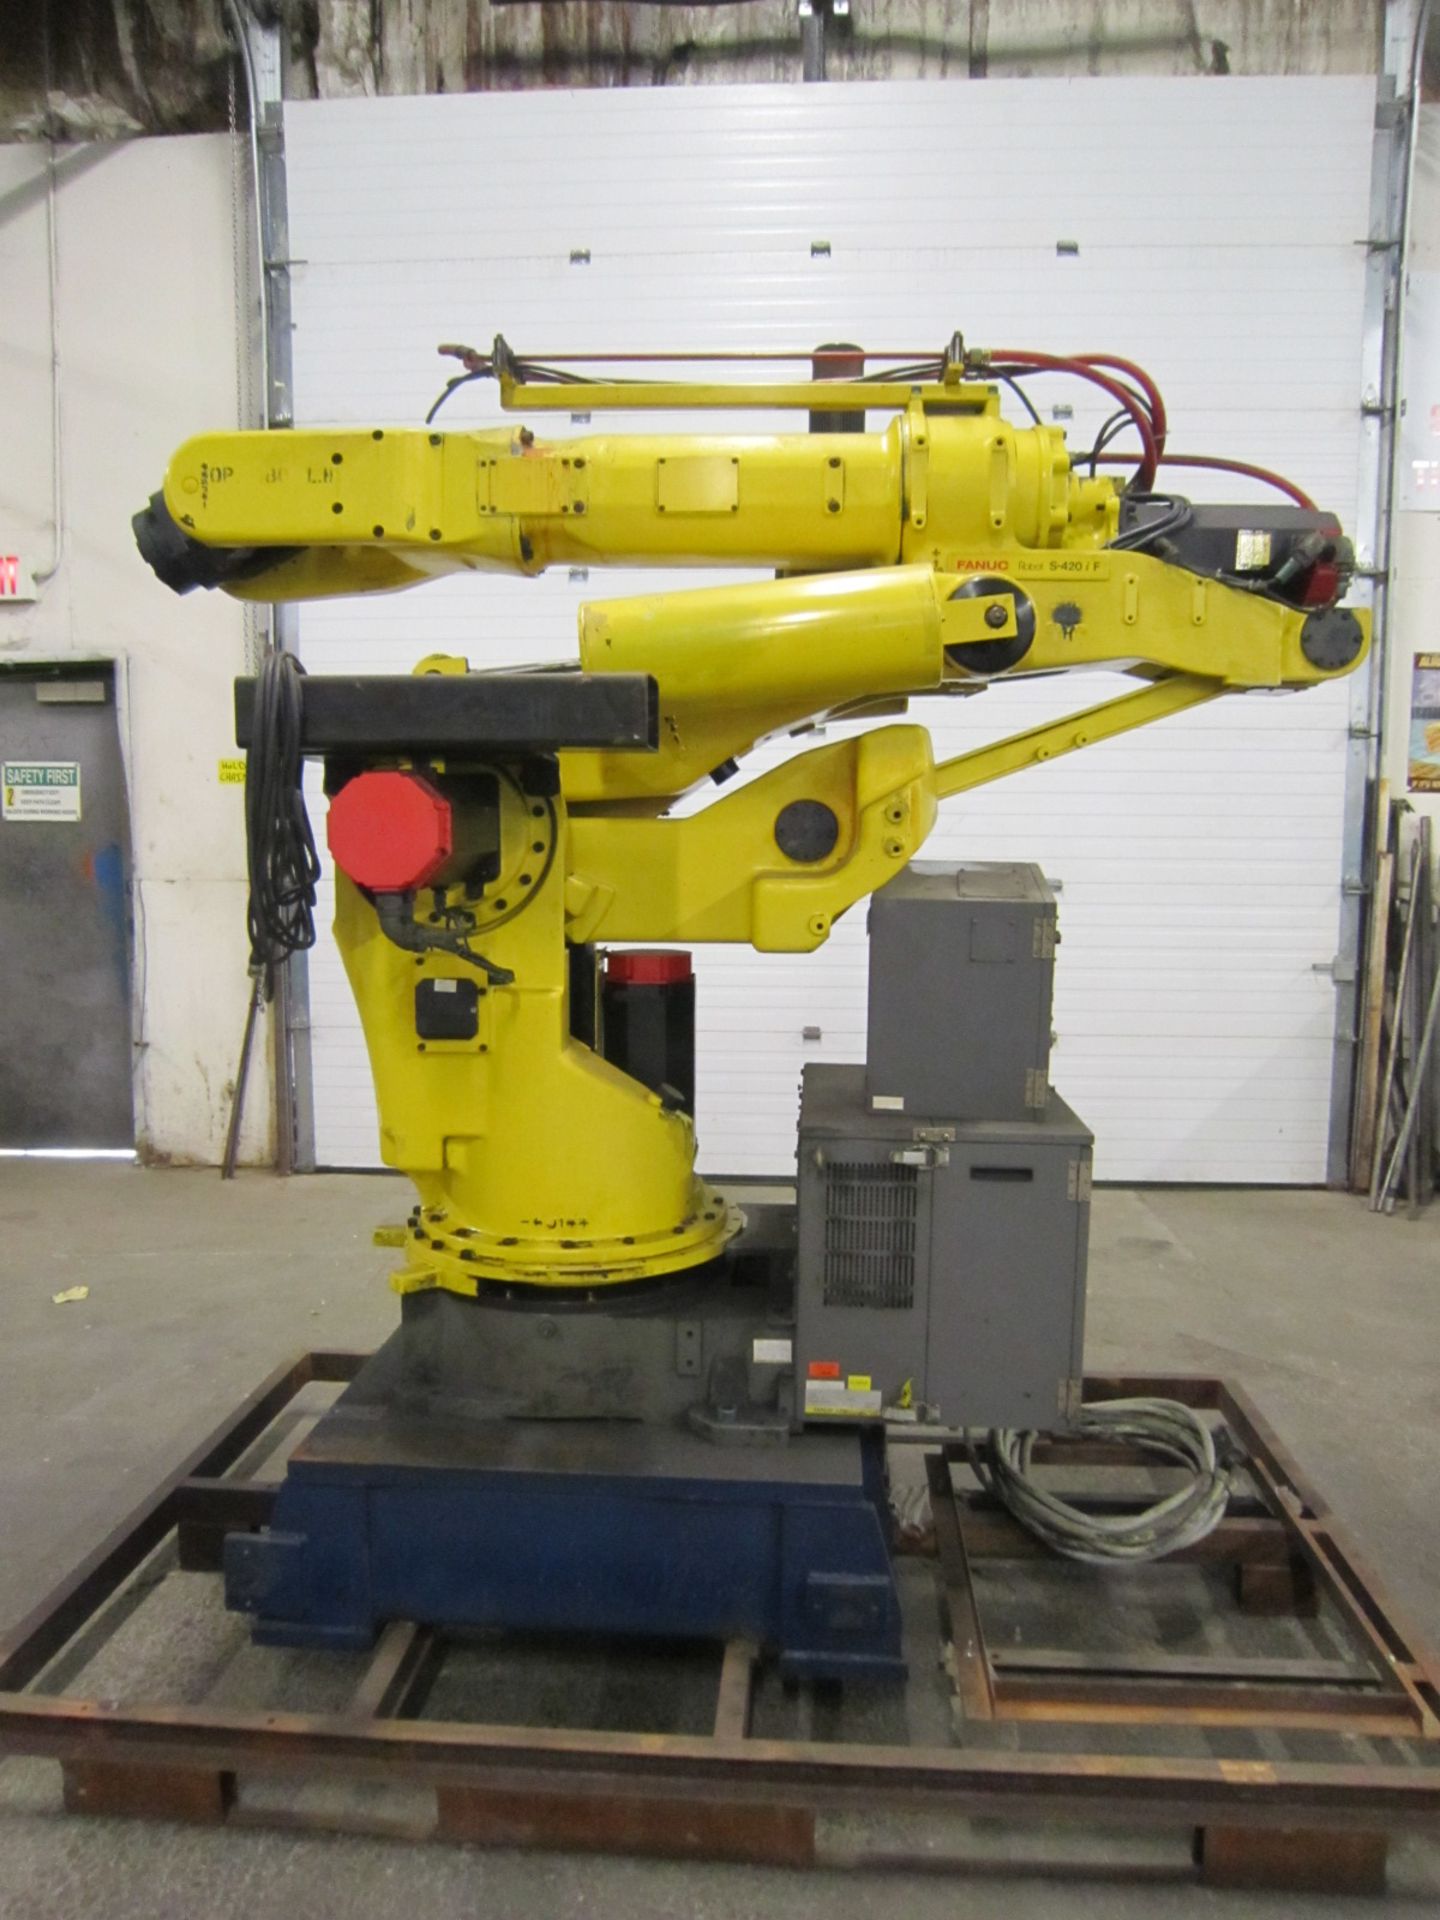 Fanuc S-420iF Industrial Robot - 120kg capacity robotic system with Fanuc R-J2 Controller and